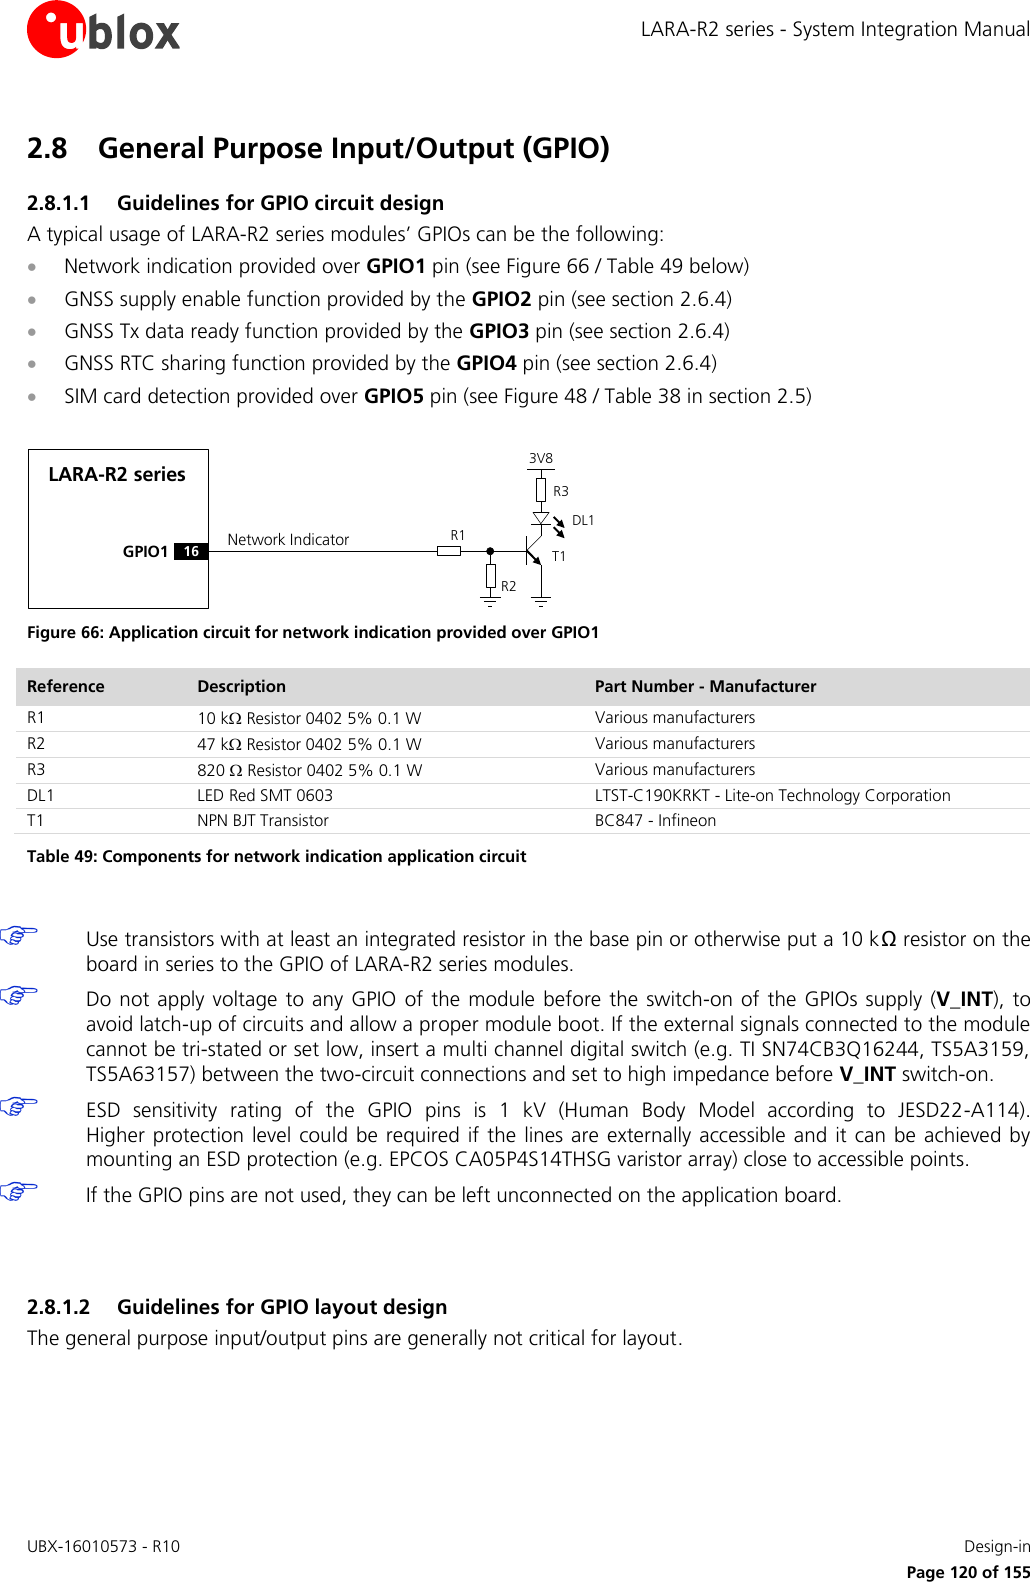 LARA-R2 series - System Integration Manual UBX-16010573 - R10    Design-in     Page 120 of 155 2.8 General Purpose Input/Output (GPIO) 2.8.1.1 Guidelines for GPIO circuit design A typical usage of LARA-R2 series modules’ GPIOs can be the following:  Network indication provided over GPIO1 pin (see Figure 66 / Table 49 below)  GNSS supply enable function provided by the GPIO2 pin (see section 2.6.4)  GNSS Tx data ready function provided by the GPIO3 pin (see section 2.6.4)  GNSS RTC sharing function provided by the GPIO4 pin (see section 2.6.4)  SIM card detection provided over GPIO5 pin (see Figure 48 / Table 38 in section 2.5)  LARA-R2 seriesGPIO1R1R33V8Network IndicatorR216DL1T1 Figure 66: Application circuit for network indication provided over GPIO1 Reference Description Part Number - Manufacturer R1 10 k Resistor 0402 5% 0.1 W Various manufacturers R2 47 k Resistor 0402 5% 0.1 W Various manufacturers R3 820  Resistor 0402 5% 0.1 W Various manufacturers DL1 LED Red SMT 0603 LTST-C190KRKT - Lite-on Technology Corporation T1 NPN BJT Transistor BC847 - Infineon Table 49: Components for network indication application circuit   Use transistors with at least an integrated resistor in the base pin or otherwise put a 10 kΩ resistor on the board in series to the GPIO of LARA-R2 series modules.  Do not apply voltage to any  GPIO of the  module before the  switch-on of the  GPIOs supply (V_INT), to avoid latch-up of circuits and allow a proper module boot. If the external signals connected to the module cannot be tri-stated or set low, insert a multi channel digital switch (e.g. TI SN74CB3Q16244, TS5A3159, TS5A63157) between the two-circuit connections and set to high impedance before V_INT switch-on.  ESD  sensitivity  rating  of  the  GPIO  pins  is  1  kV  (Human  Body  Model  according  to  JESD22-A114).  Higher protection level  could be required  if  the lines are externally accessible and it can  be  achieved by mounting an ESD protection (e.g. EPCOS CA05P4S14THSG varistor array) close to accessible points.  If the GPIO pins are not used, they can be left unconnected on the application board.   2.8.1.2 Guidelines for GPIO layout design The general purpose input/output pins are generally not critical for layout.  